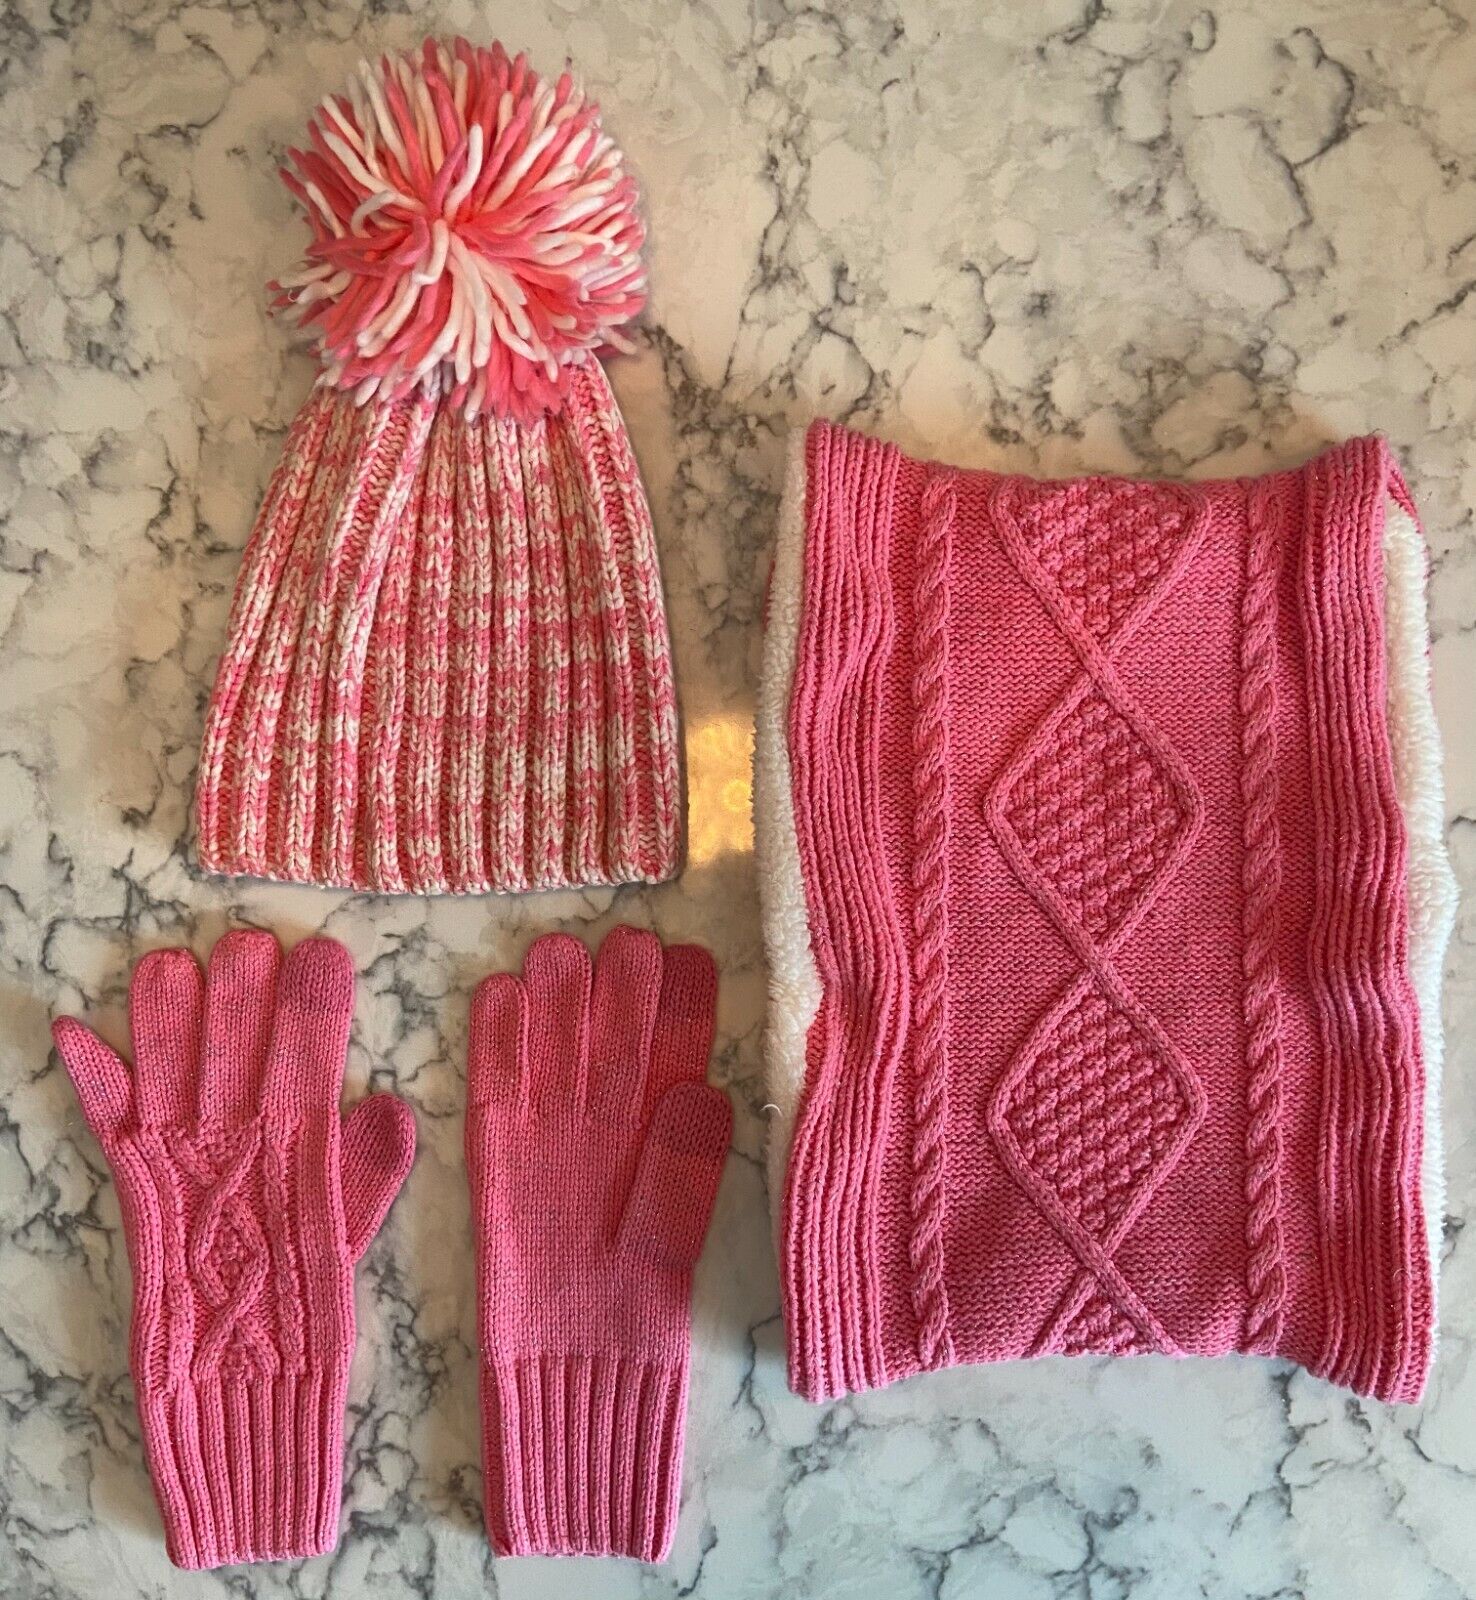 Girls’ Hanna Andersson Hat, Cowl / Scarf And Gloves Set, Size Large